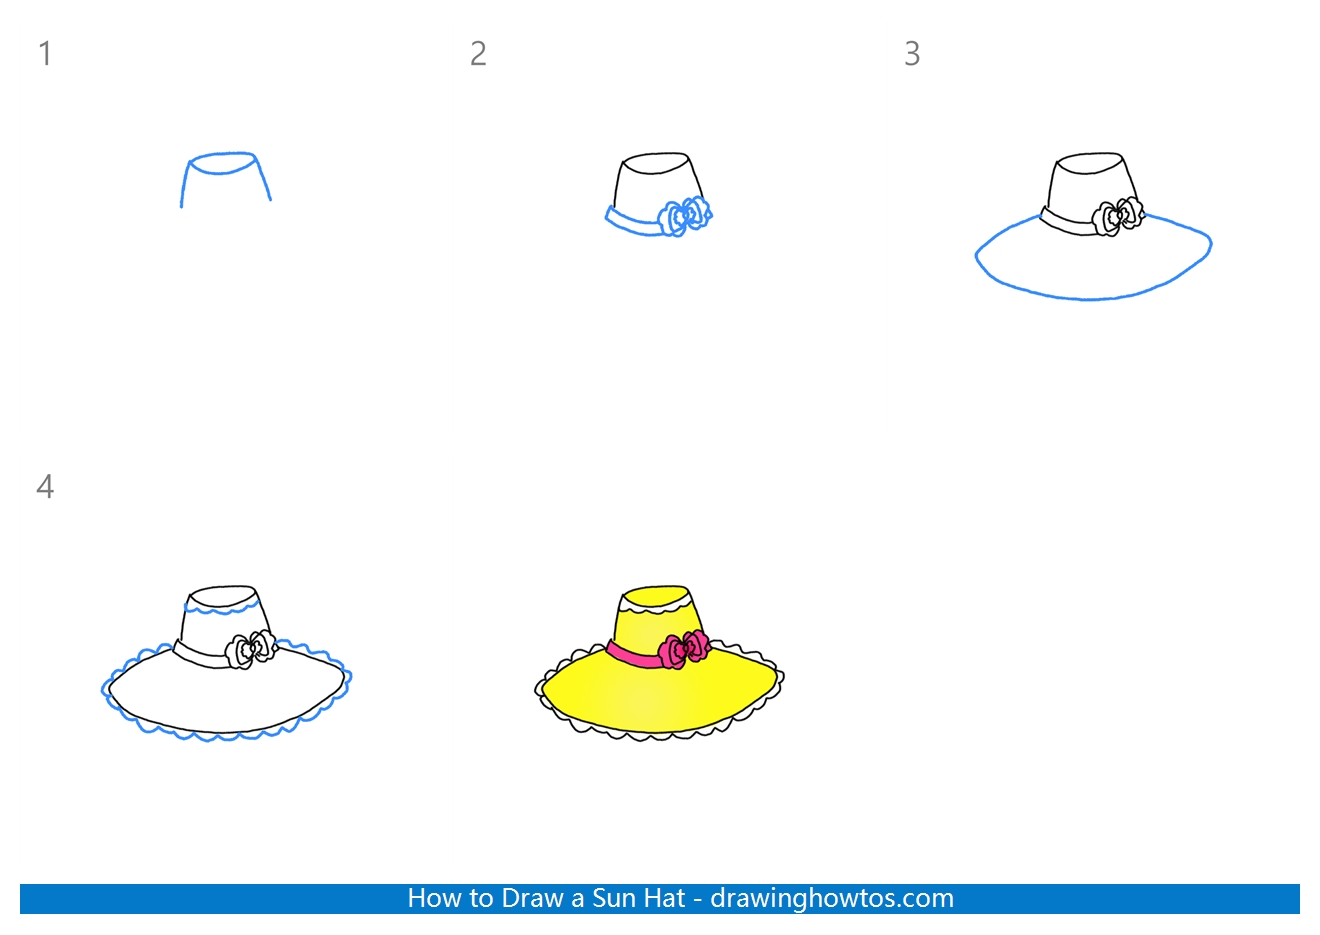 How to Draw a Sun Hat Step by Step